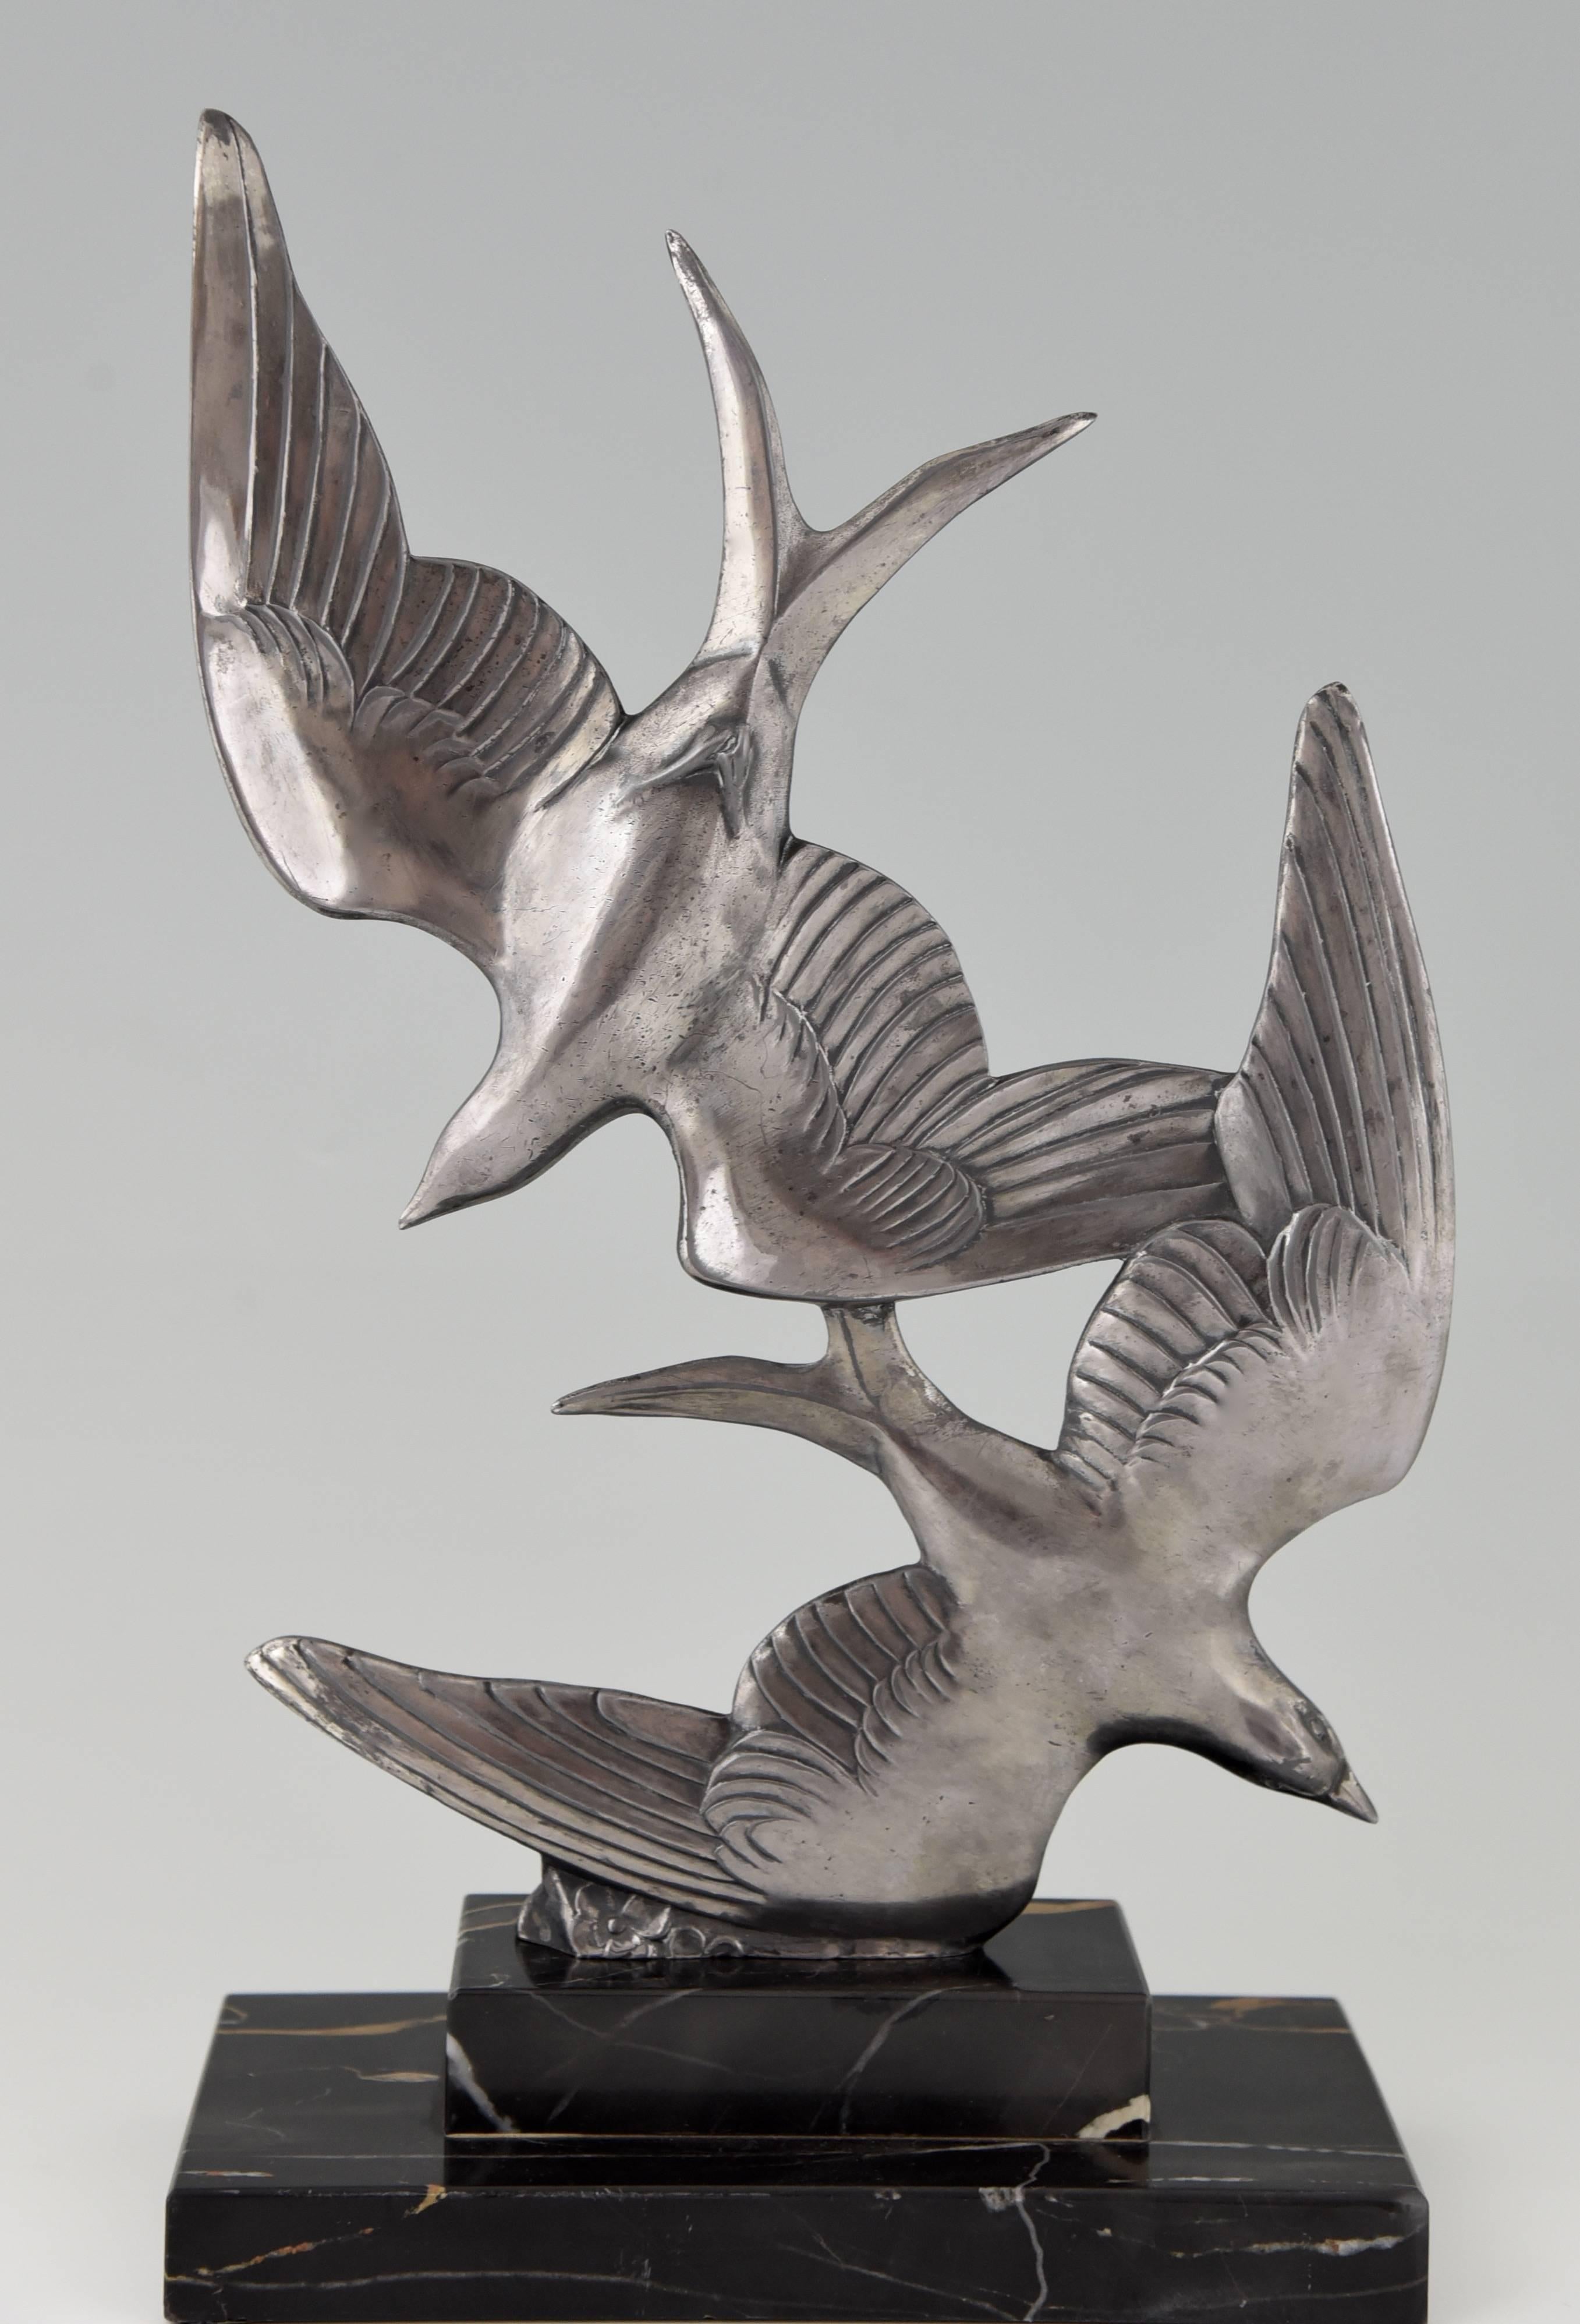 A nice Art Deco sculpture of birds in flight by the French artist M. Font.
Beautiful Portor marble base. 

Artist/Maker: M. Font.
Signature/ Marks: M. Font.
Style: Art Deco.
Date: 1930.
Material: Metal with old silver patina. Portor marble